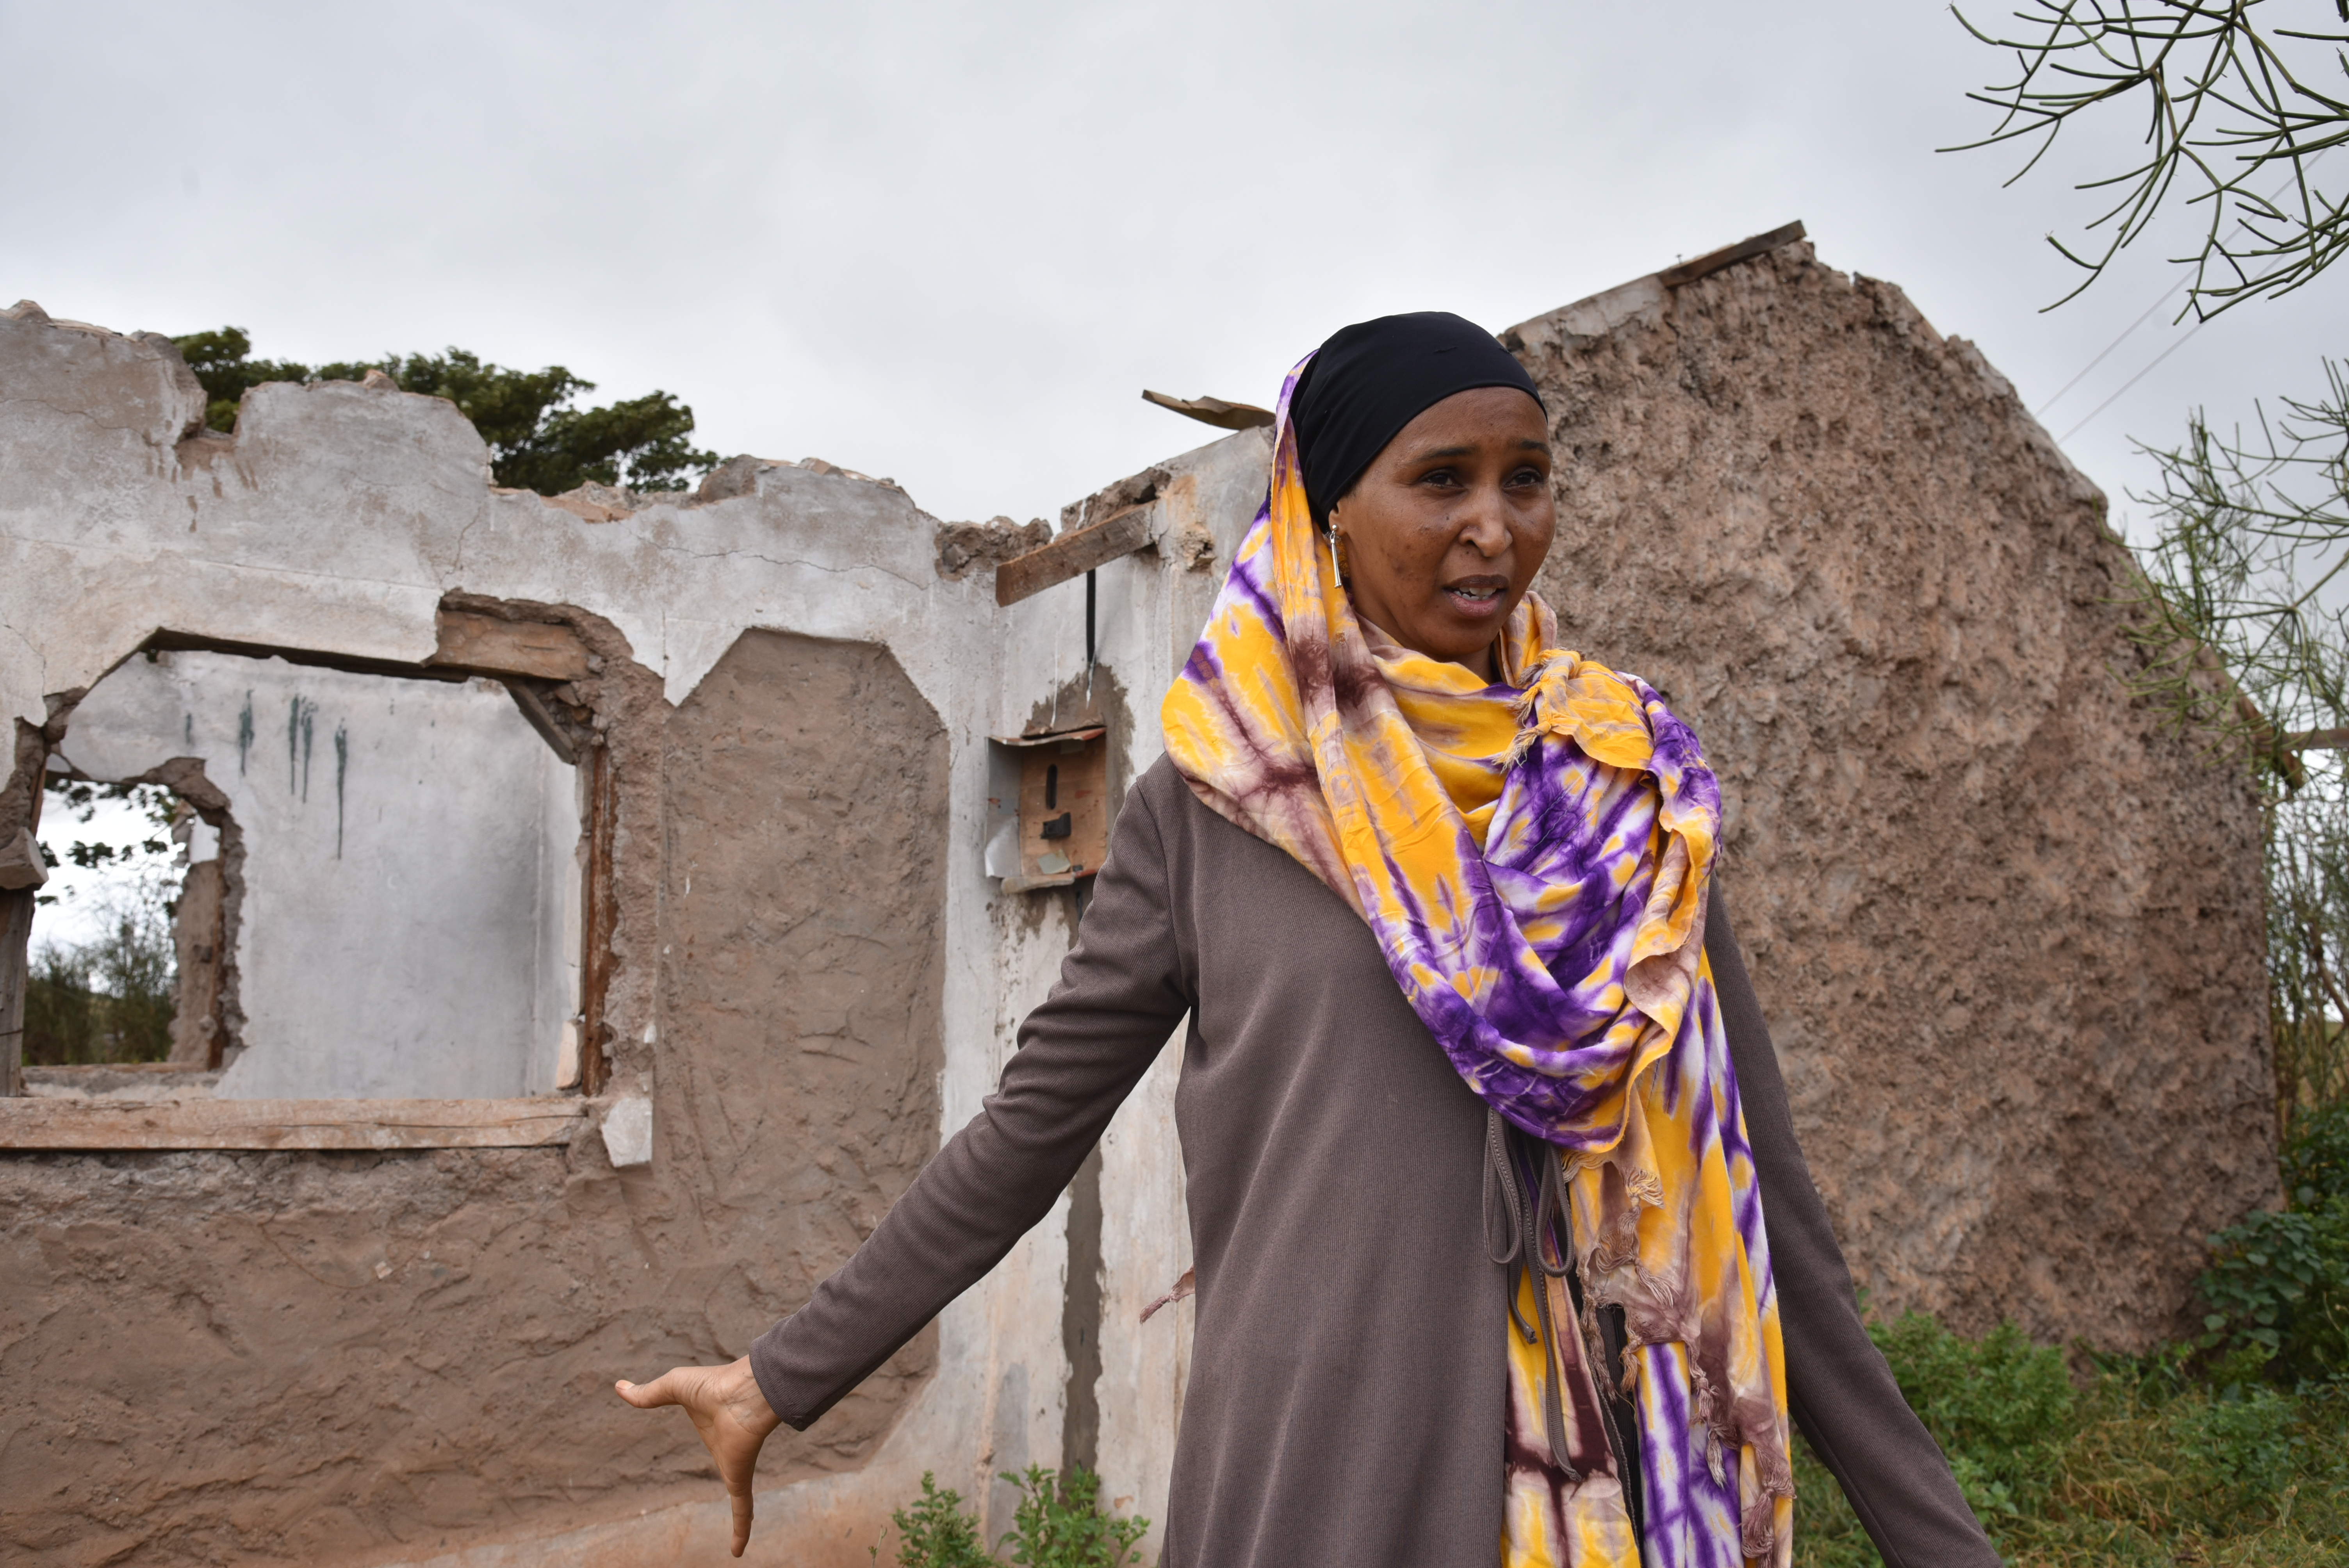 Sori Wario, 36, showing the damage to her community in Marsabit. She was displaced from her home but is now an active voice in its peace and security discussions as a member of the Marsabit Women’s Mediation Network. Photo: UN Women/Luke Horswell